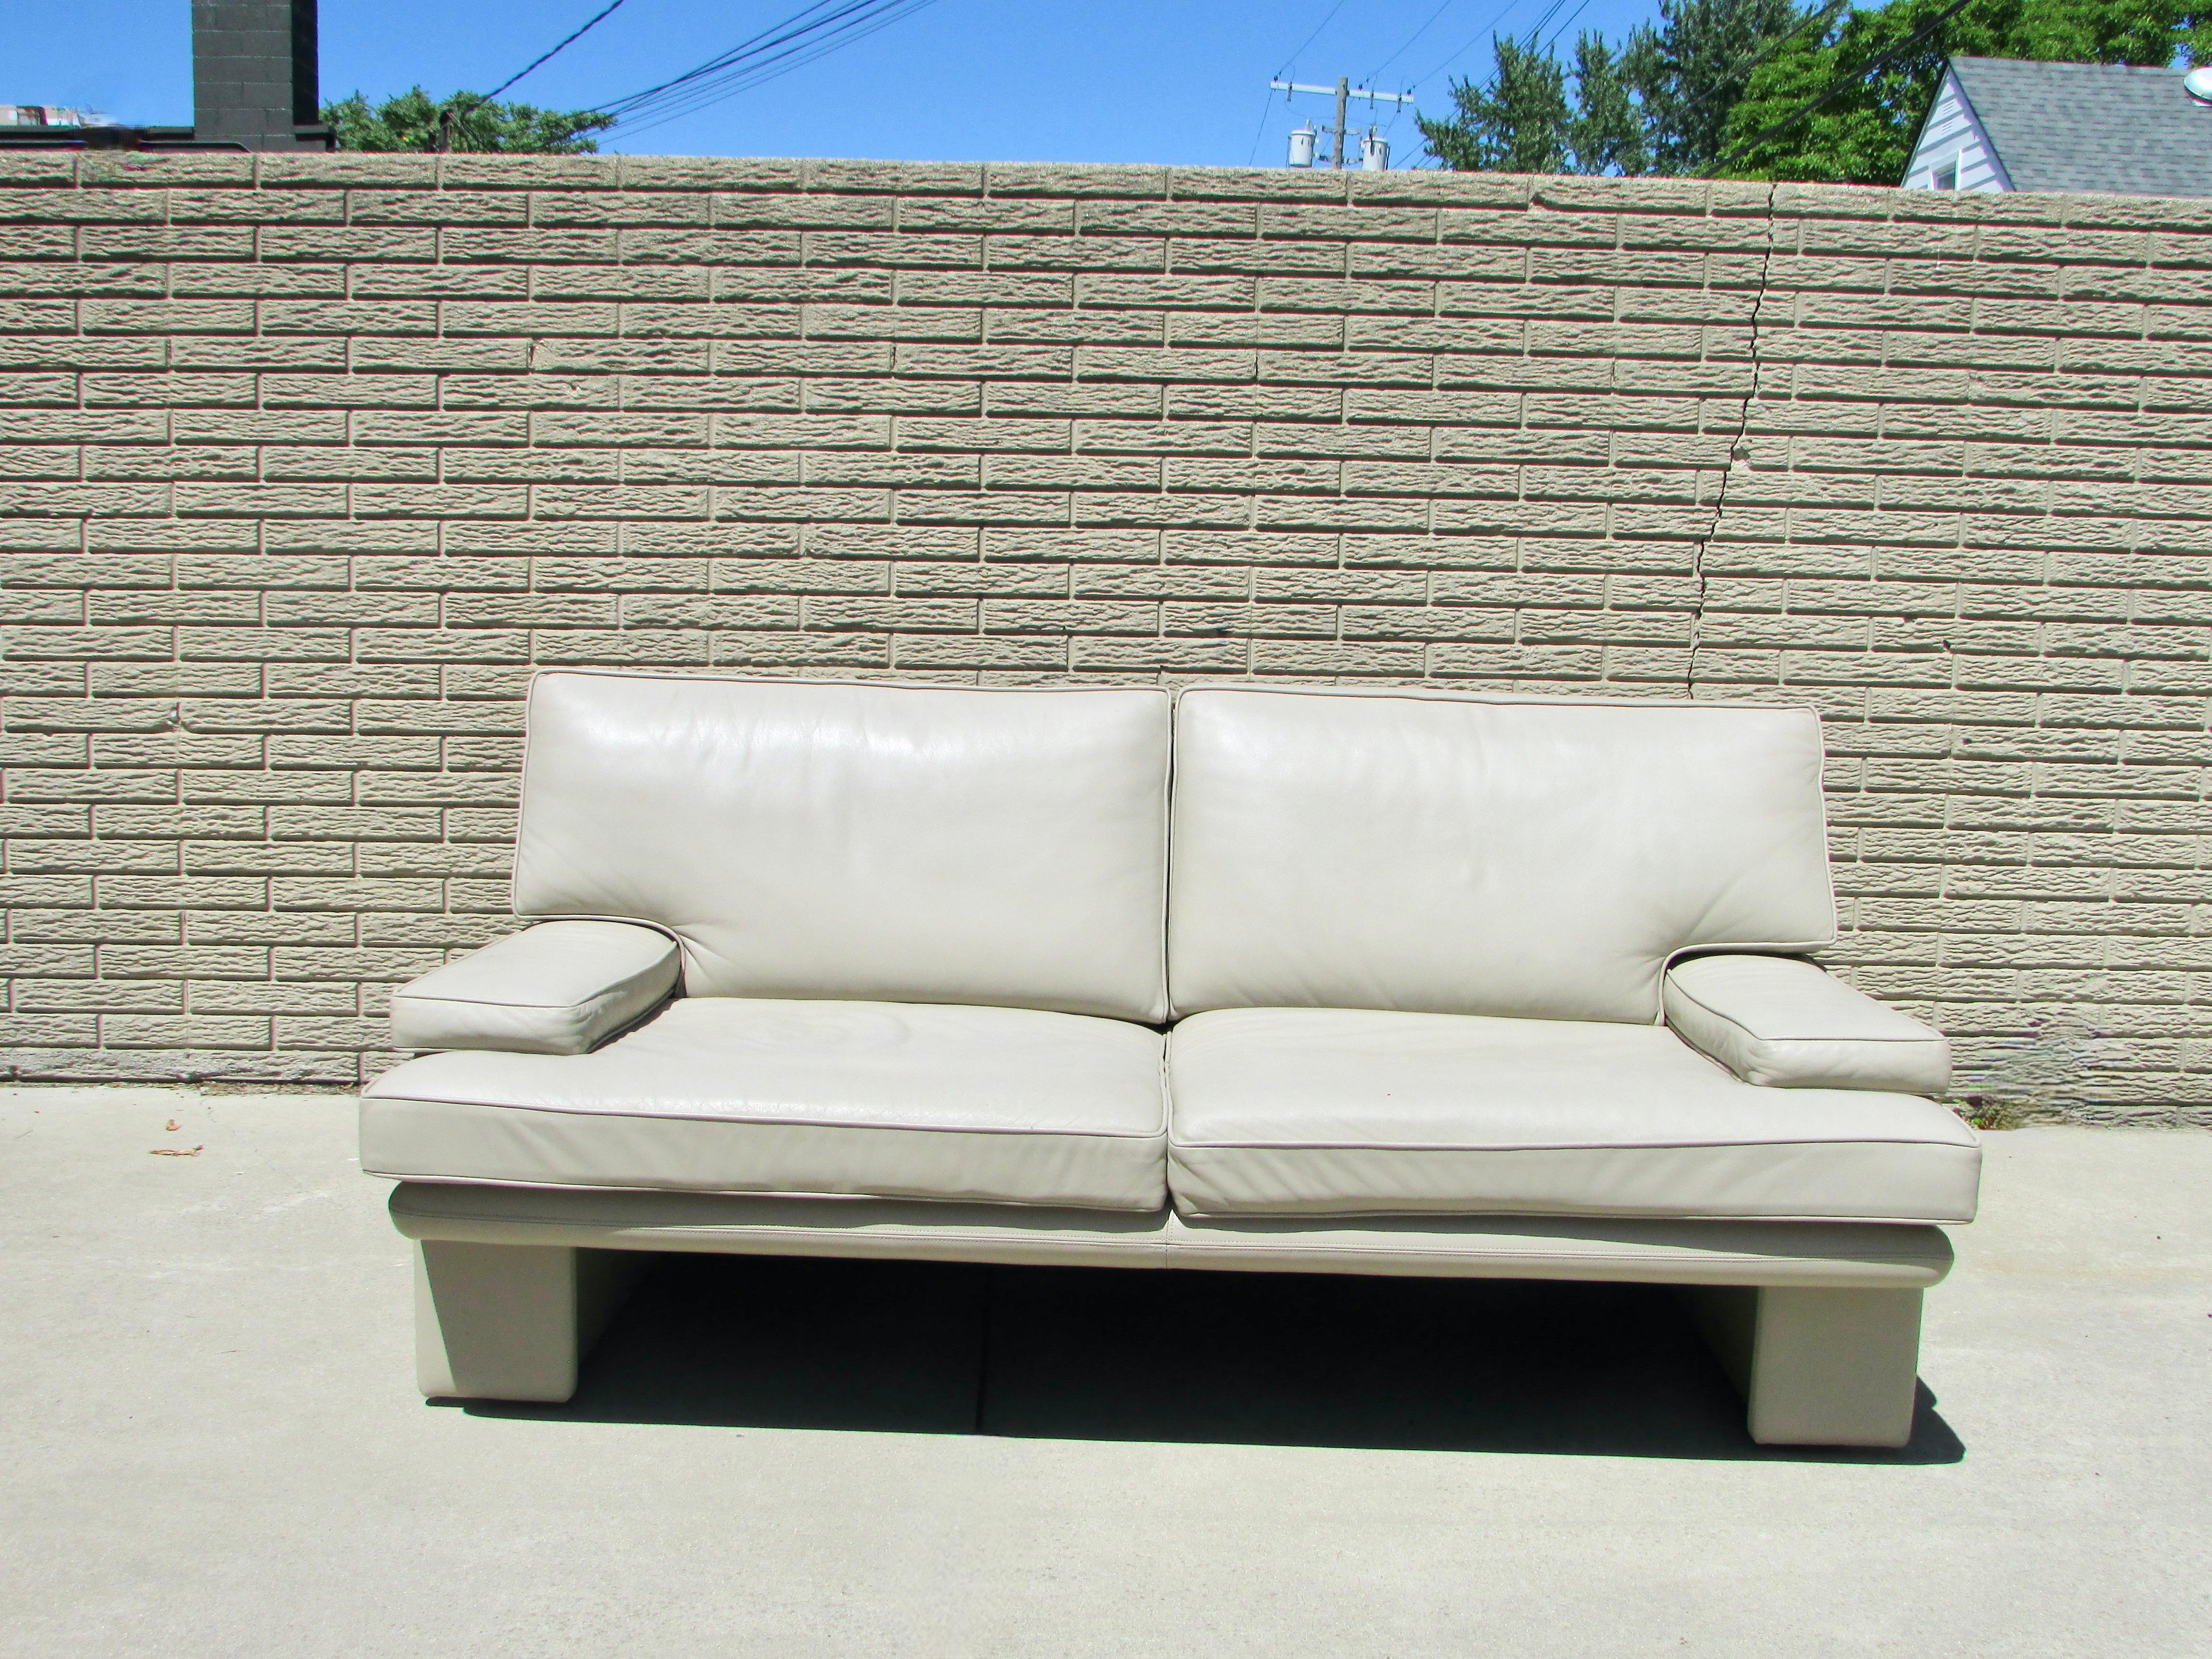 Beautifully stitched sand tone leather couch. Leather and cushions are in fine condition. Designed by Walter Knoll for Brayton international. Brayton was absorbed by steel case in the late eighties. This couch is probably early 80s production.